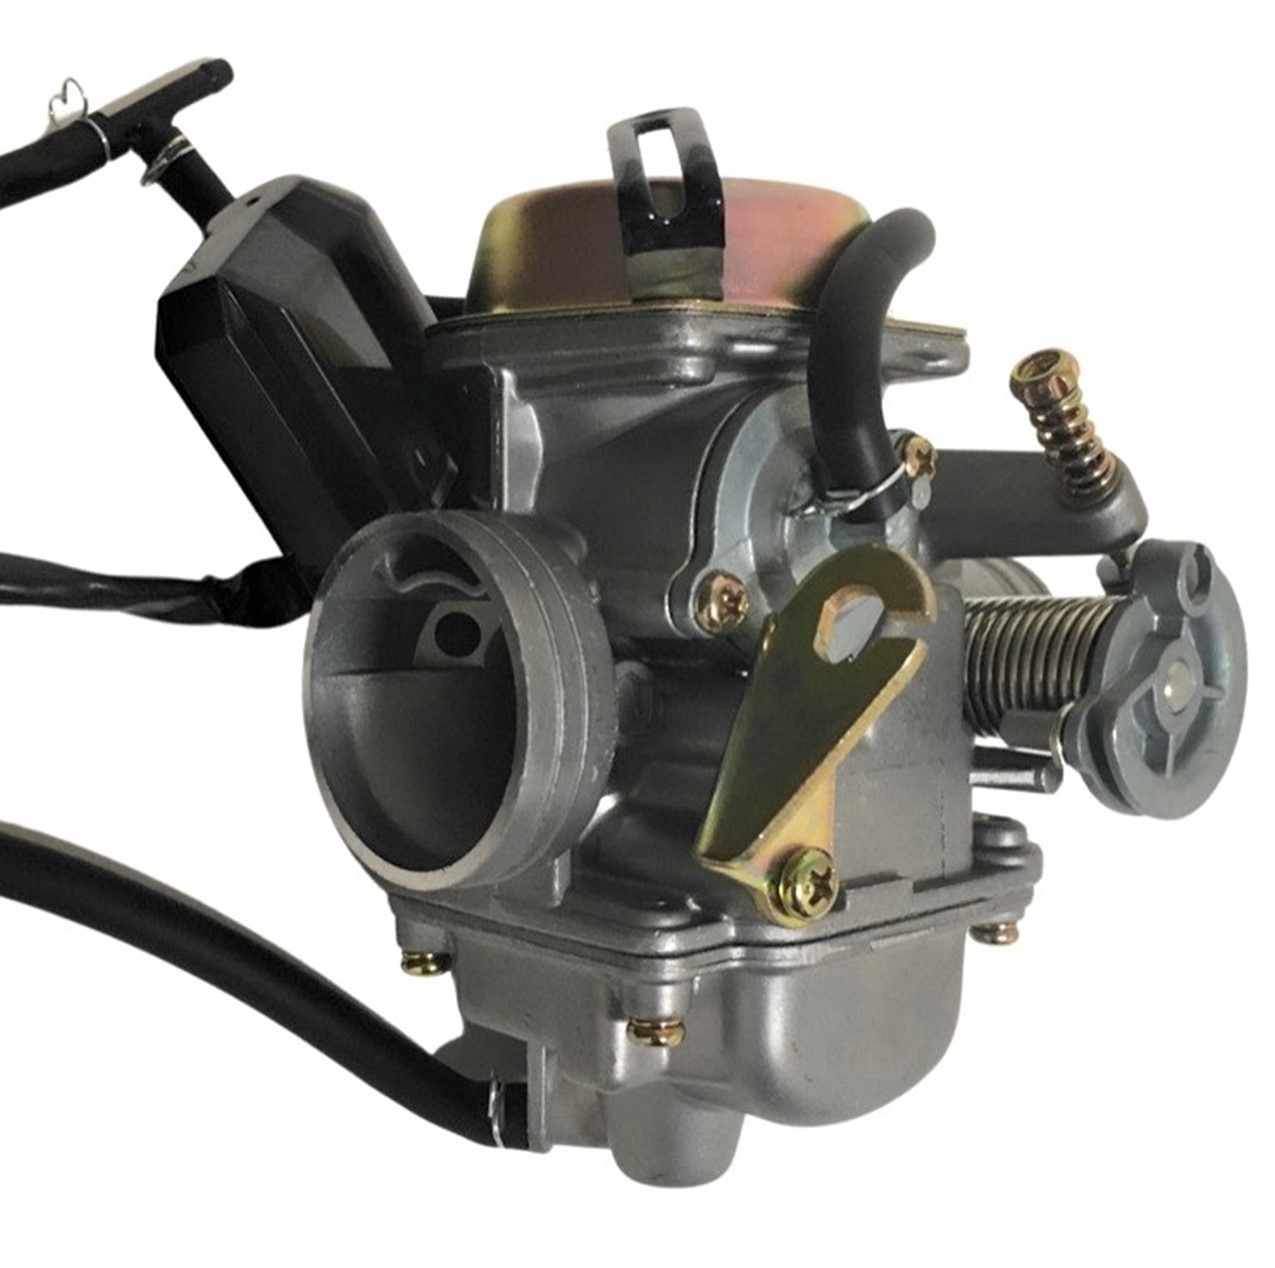 Keihin Type PD24J Carburetor TOP QUALITY-Best Value Intake OD=32mm Air Box OD=42mm Fits Most GY6 125, 150, 180cc ATV, GoKarts, Motorcycles, Scooters - Click Image to Close